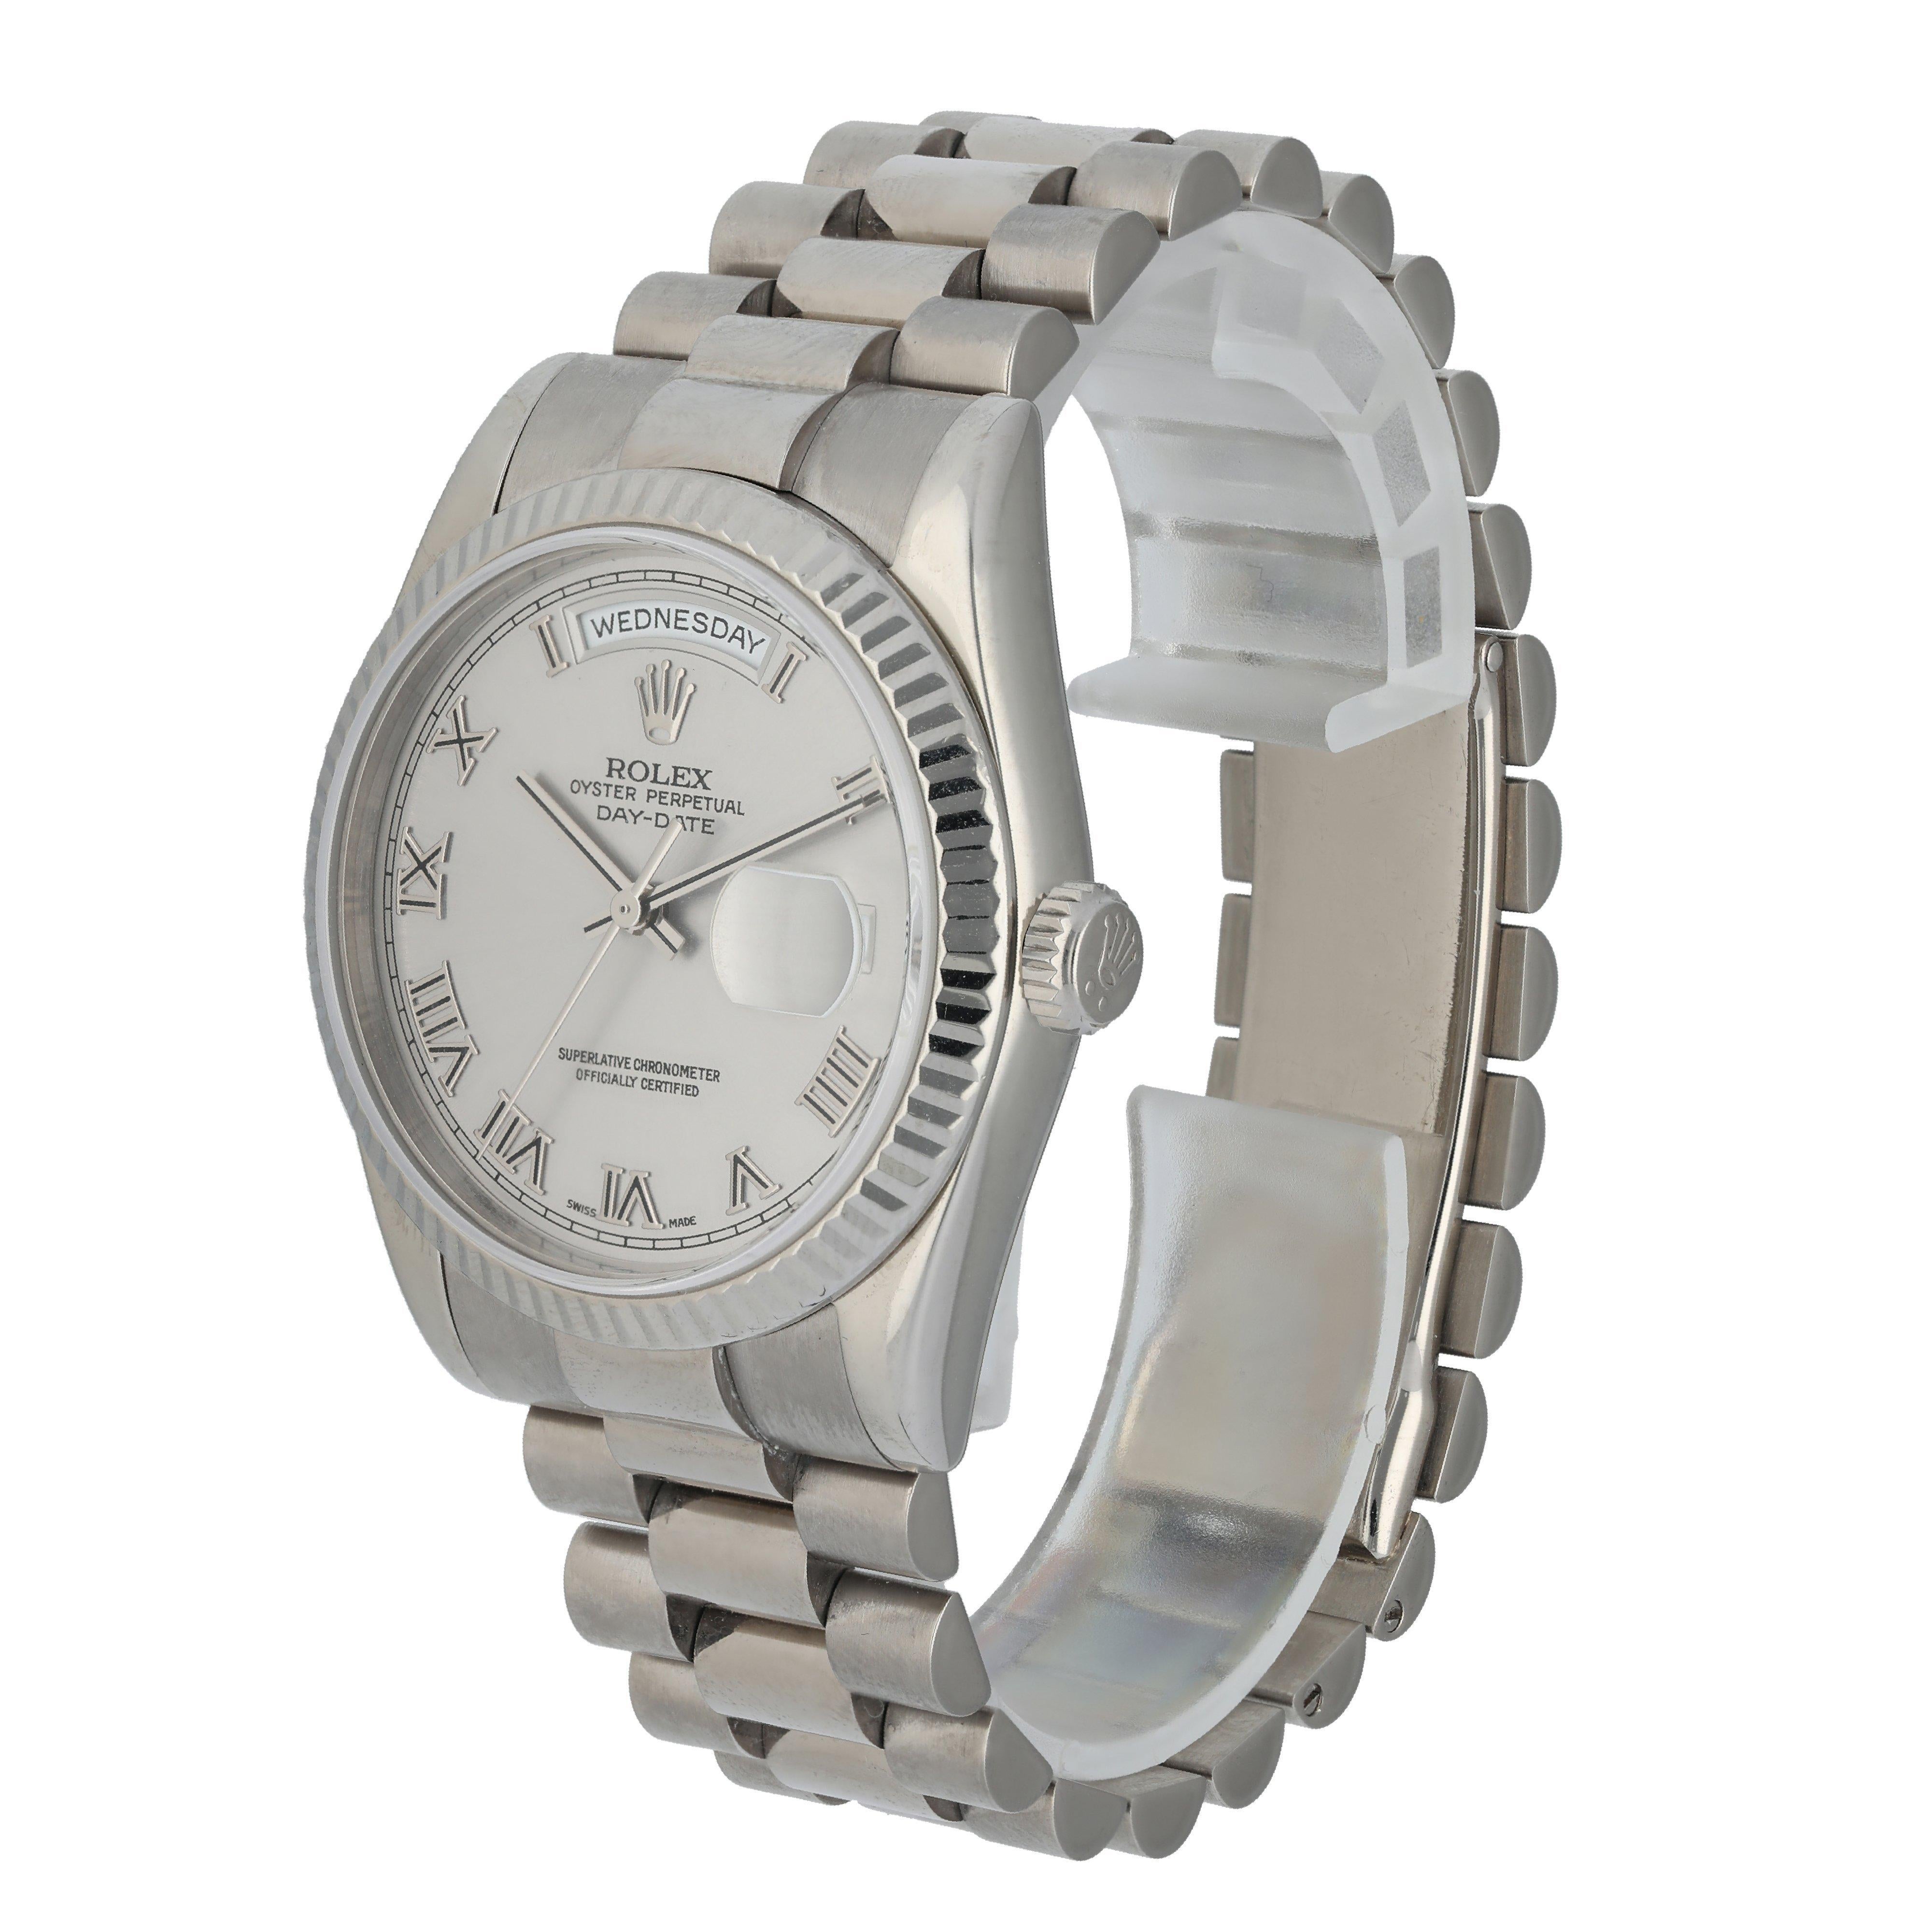 Rolex Day-Date President 118239 men's Watch.
36mm white gold case with fluted white gold bezel.
Silver dial with gold hands and Roman numeral hour markers.
Minute markers around the outer dial.
Date display at the 3 o'clock position and a day